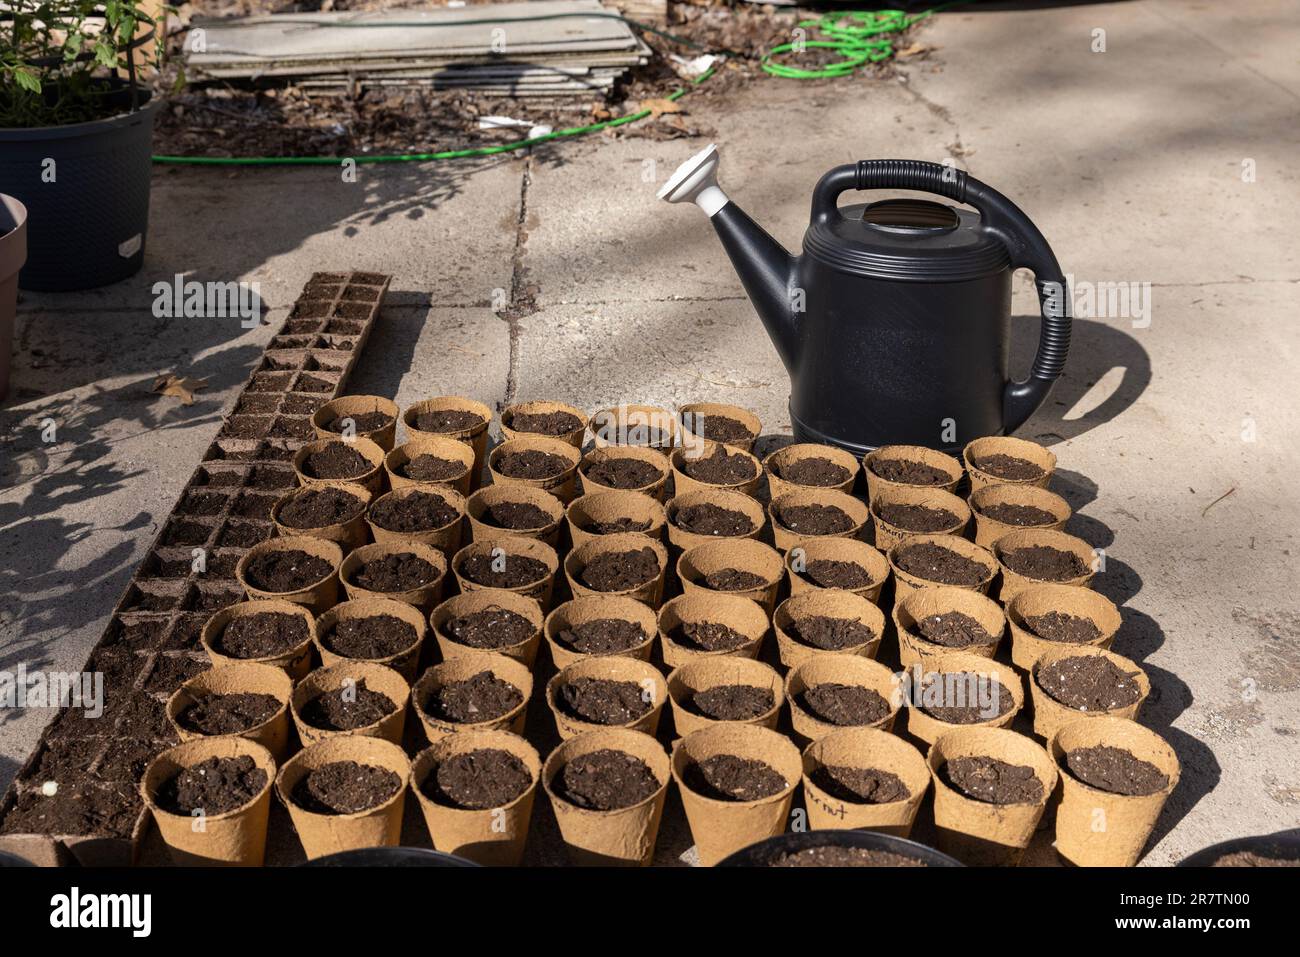 Black watering can behind rows of dirt filled containers ready for seed Stock Photo